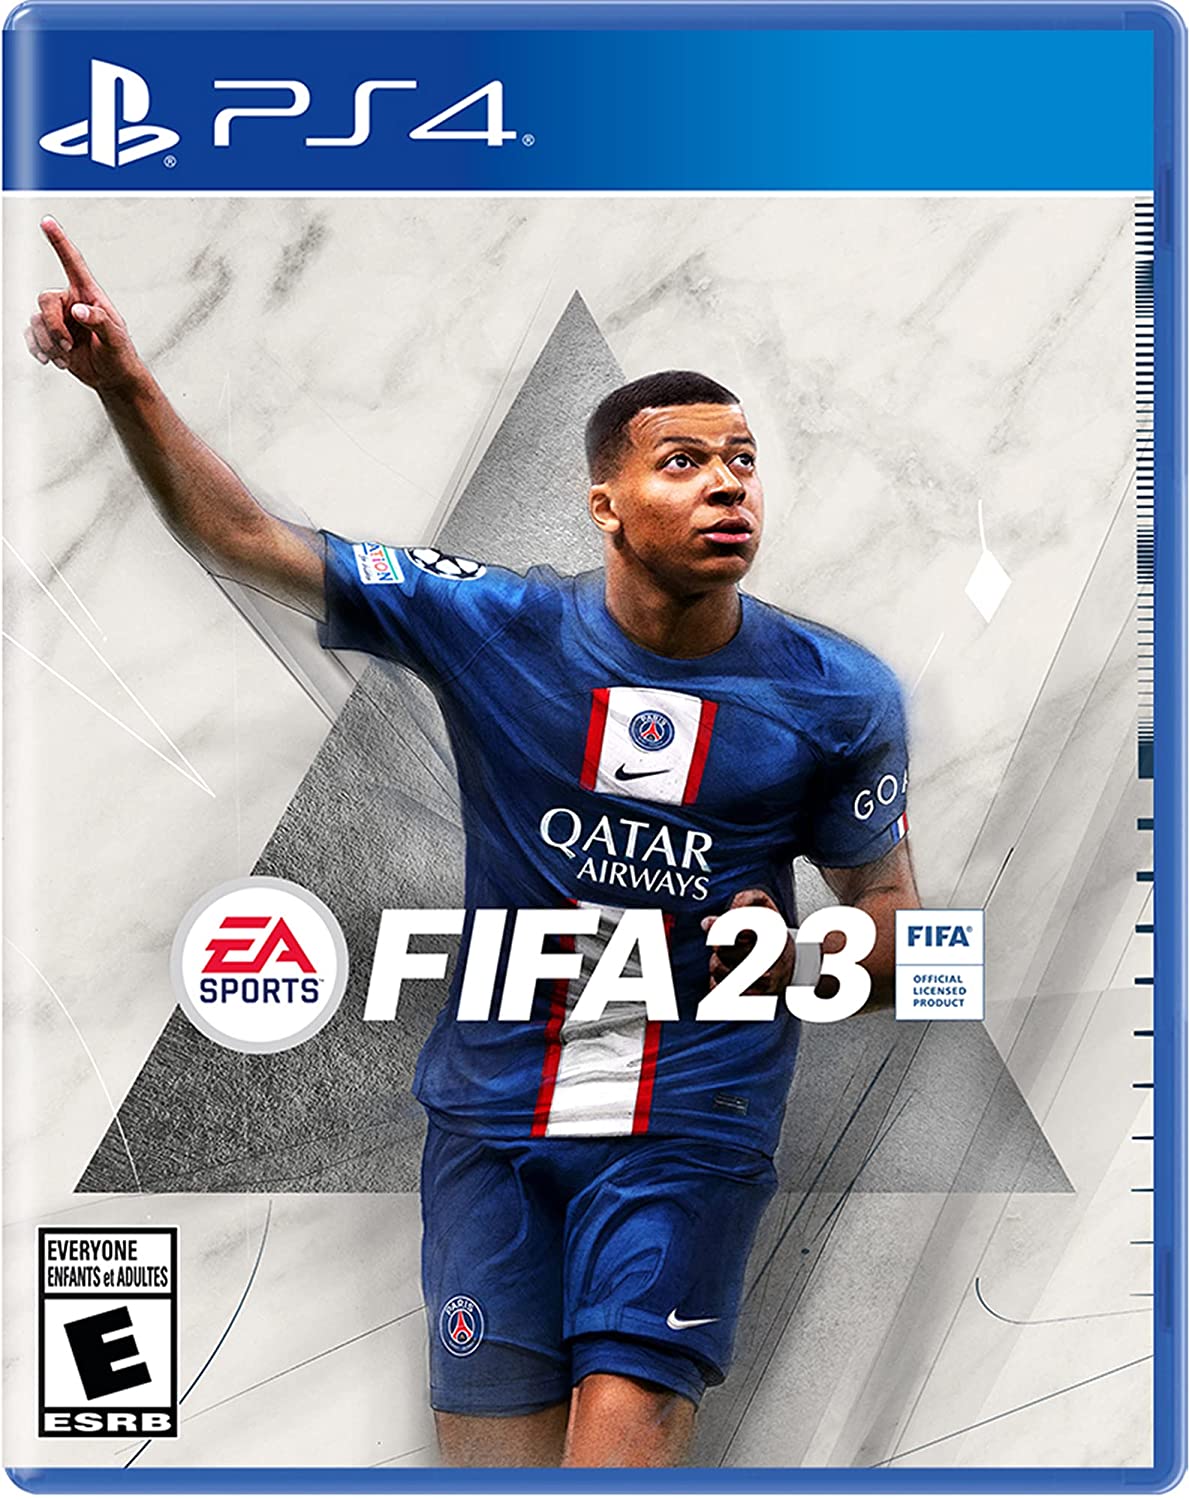 Fifa 23 Game CD PS4 Buy your PS4 Game CD online